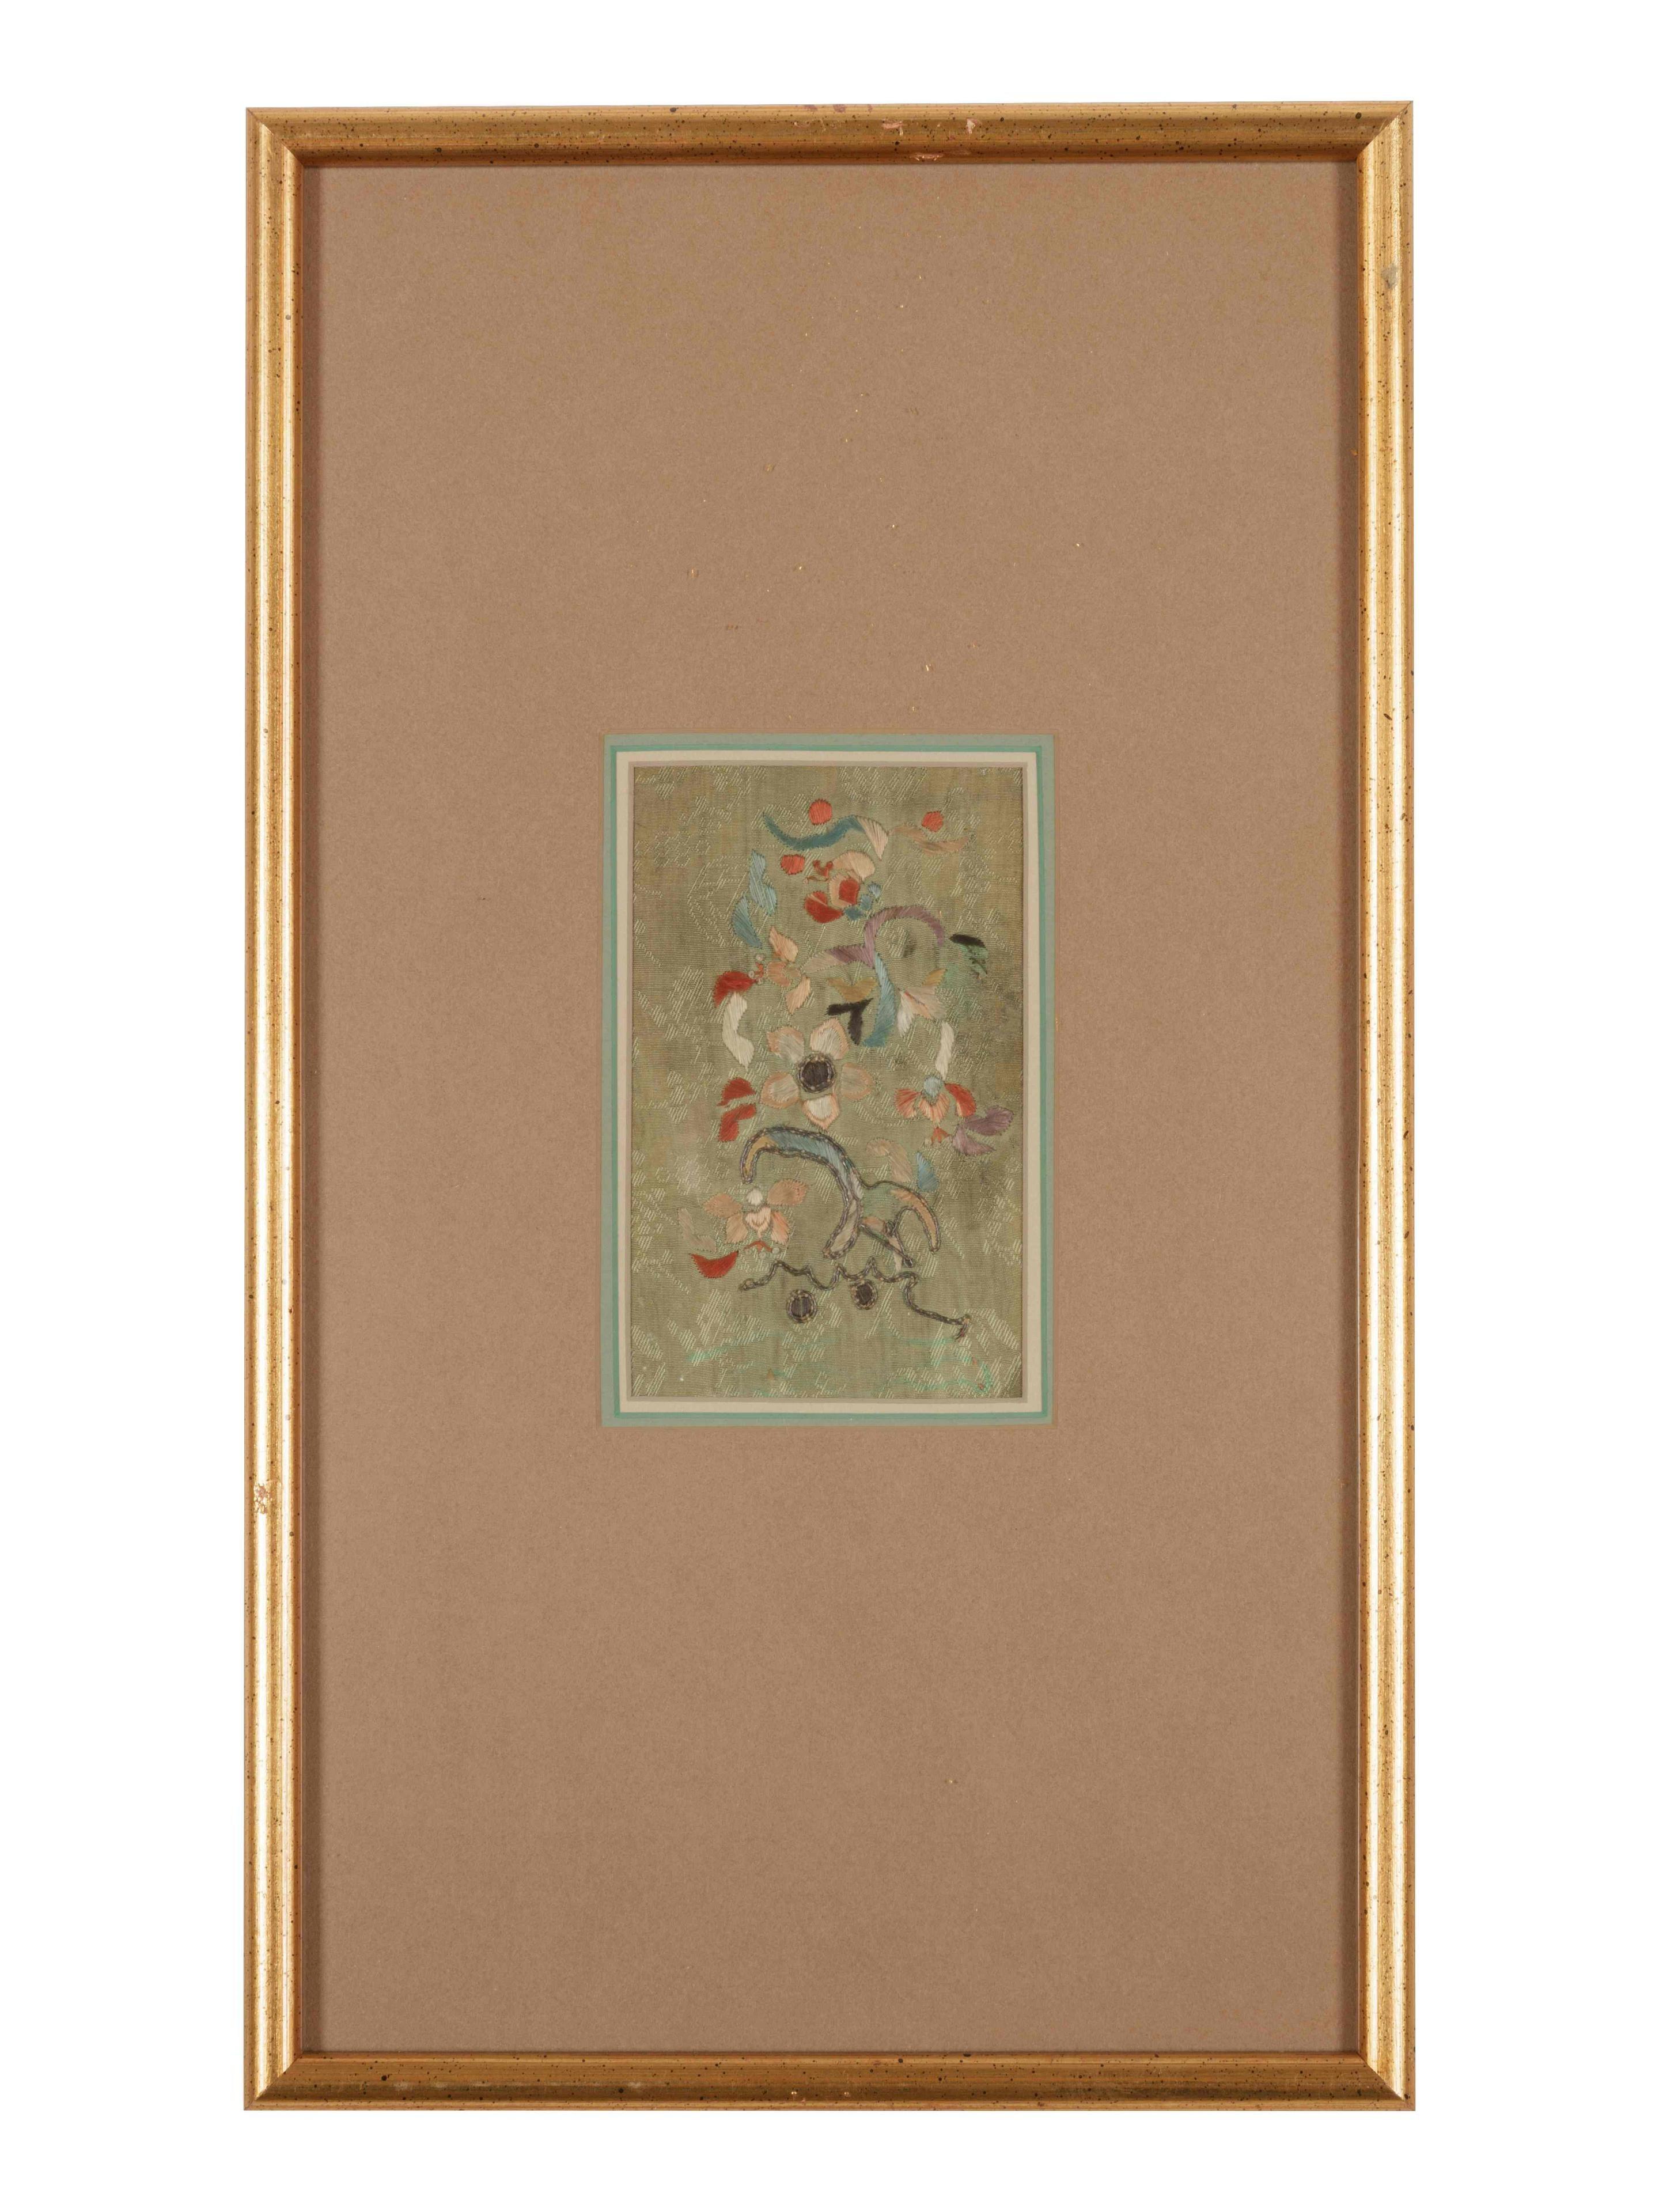 A set of three antique textile fragments from China, circa 18-19th century Qing dynasty, professionally displayed in matching giltwood frames as a triptych. Originally they adorned the 